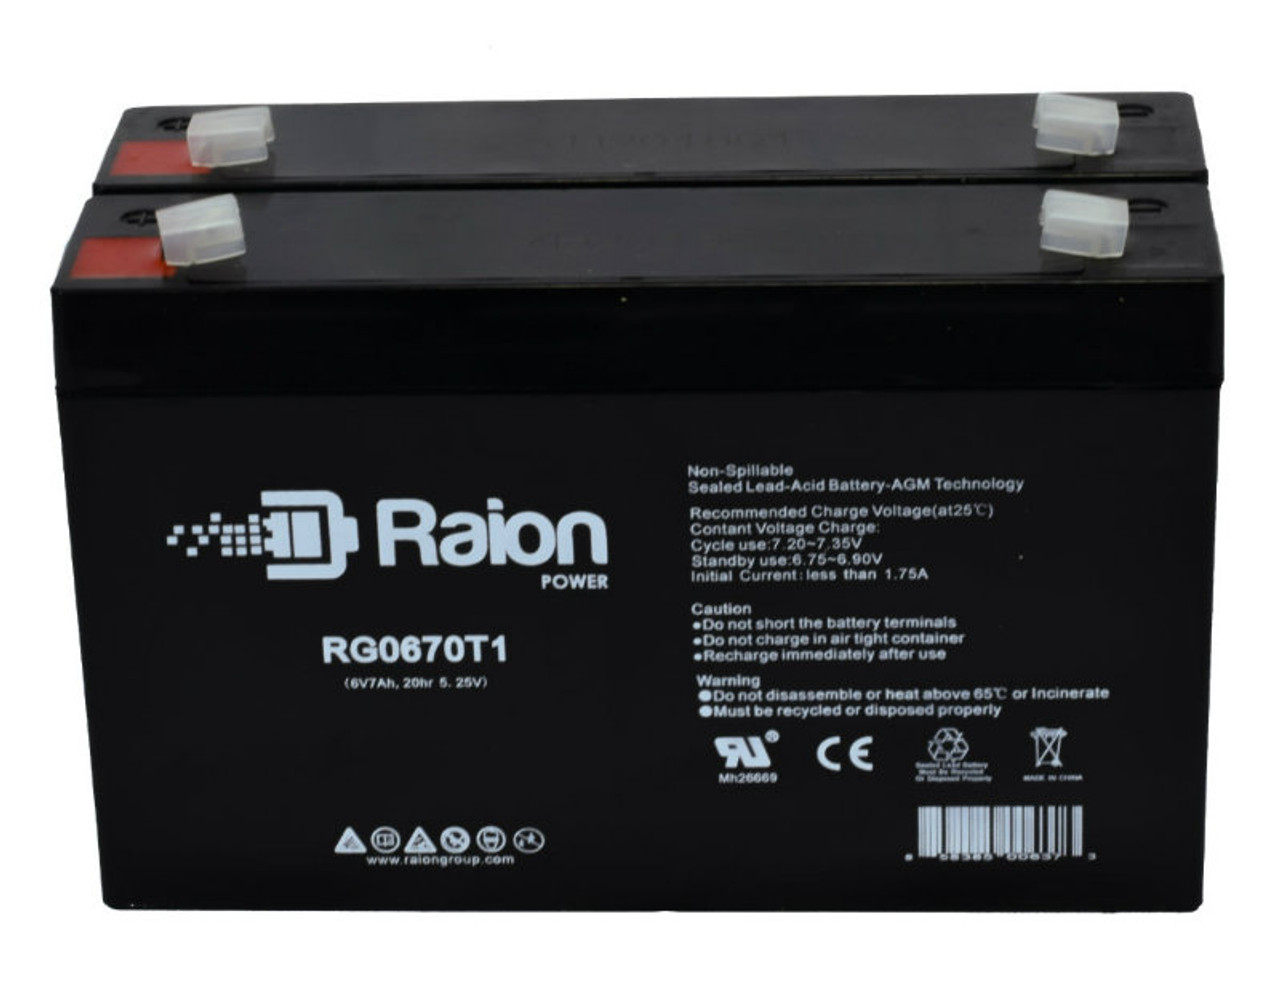 Raion Power RG0670T1 6V 7Ah Replacement Battery for Pace Tech Oximax 700 Pulse Oximeter - 2 Pack